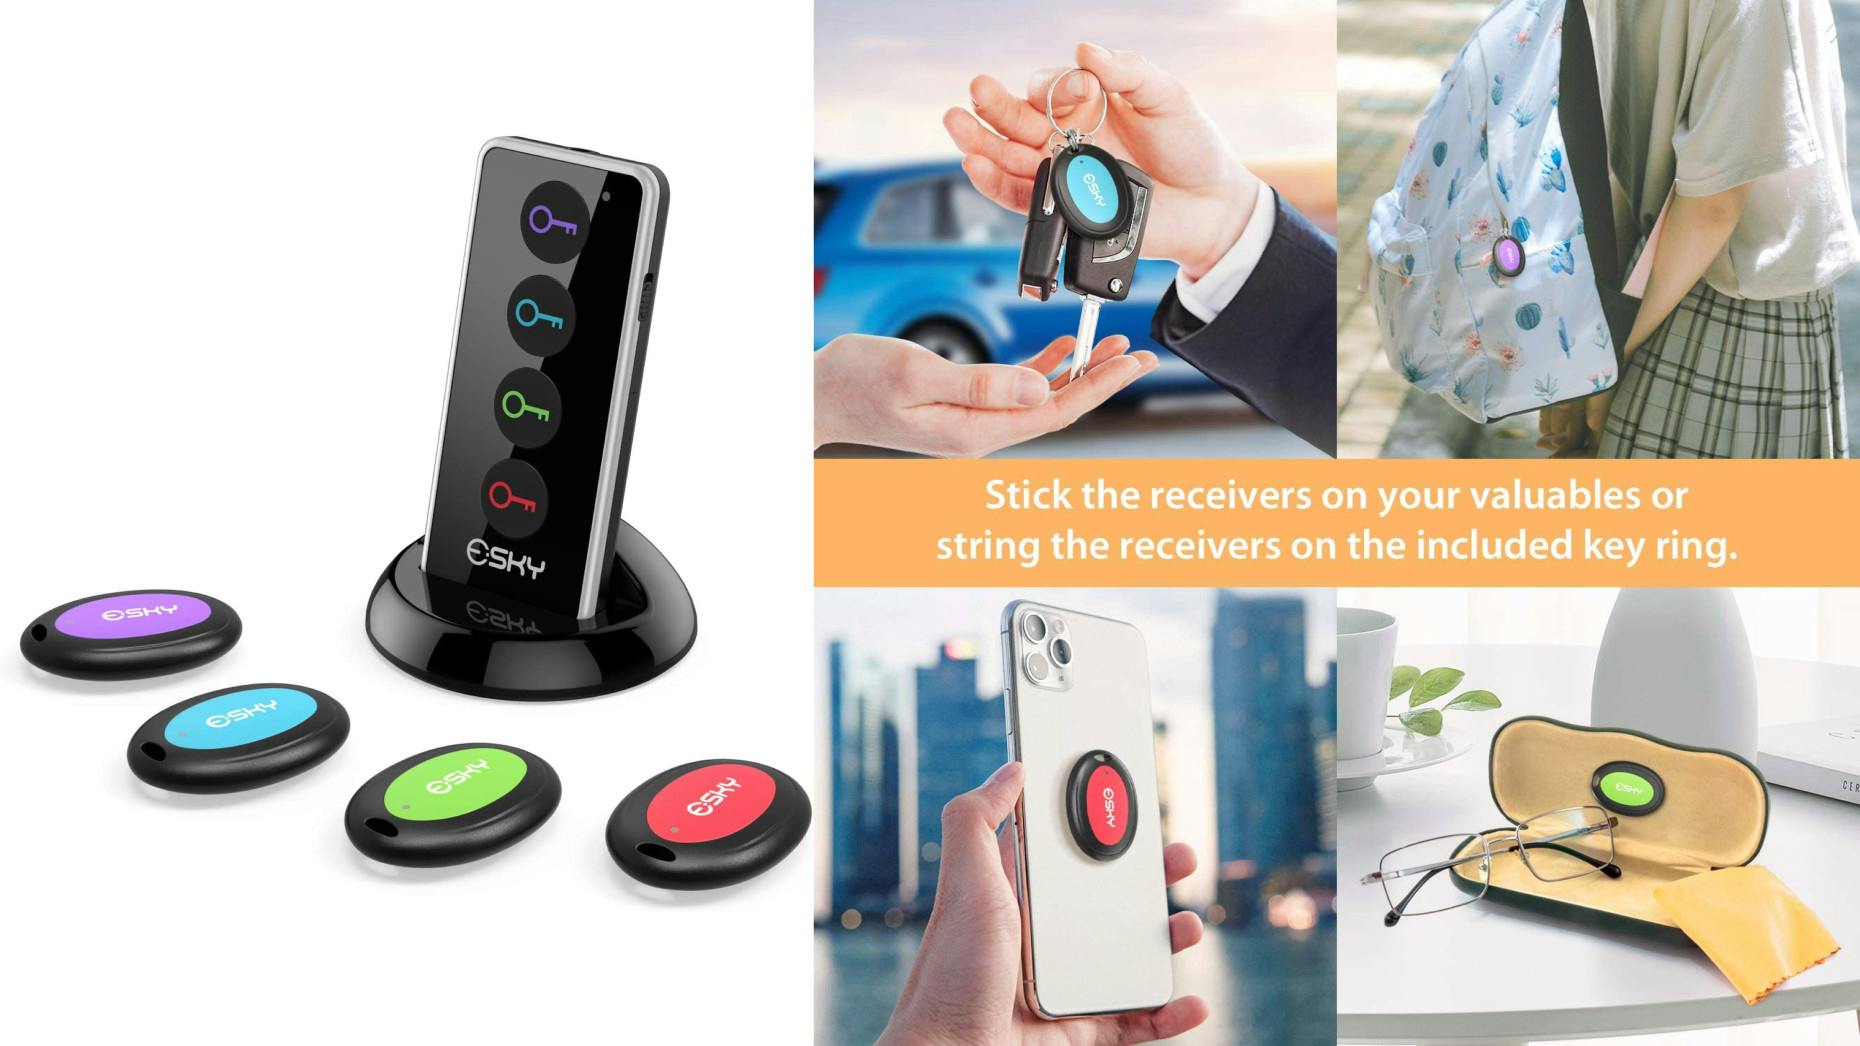 Ten Cool Home Gadgets You Need in 2022, to Make Your Life Easier - Green  Prophet